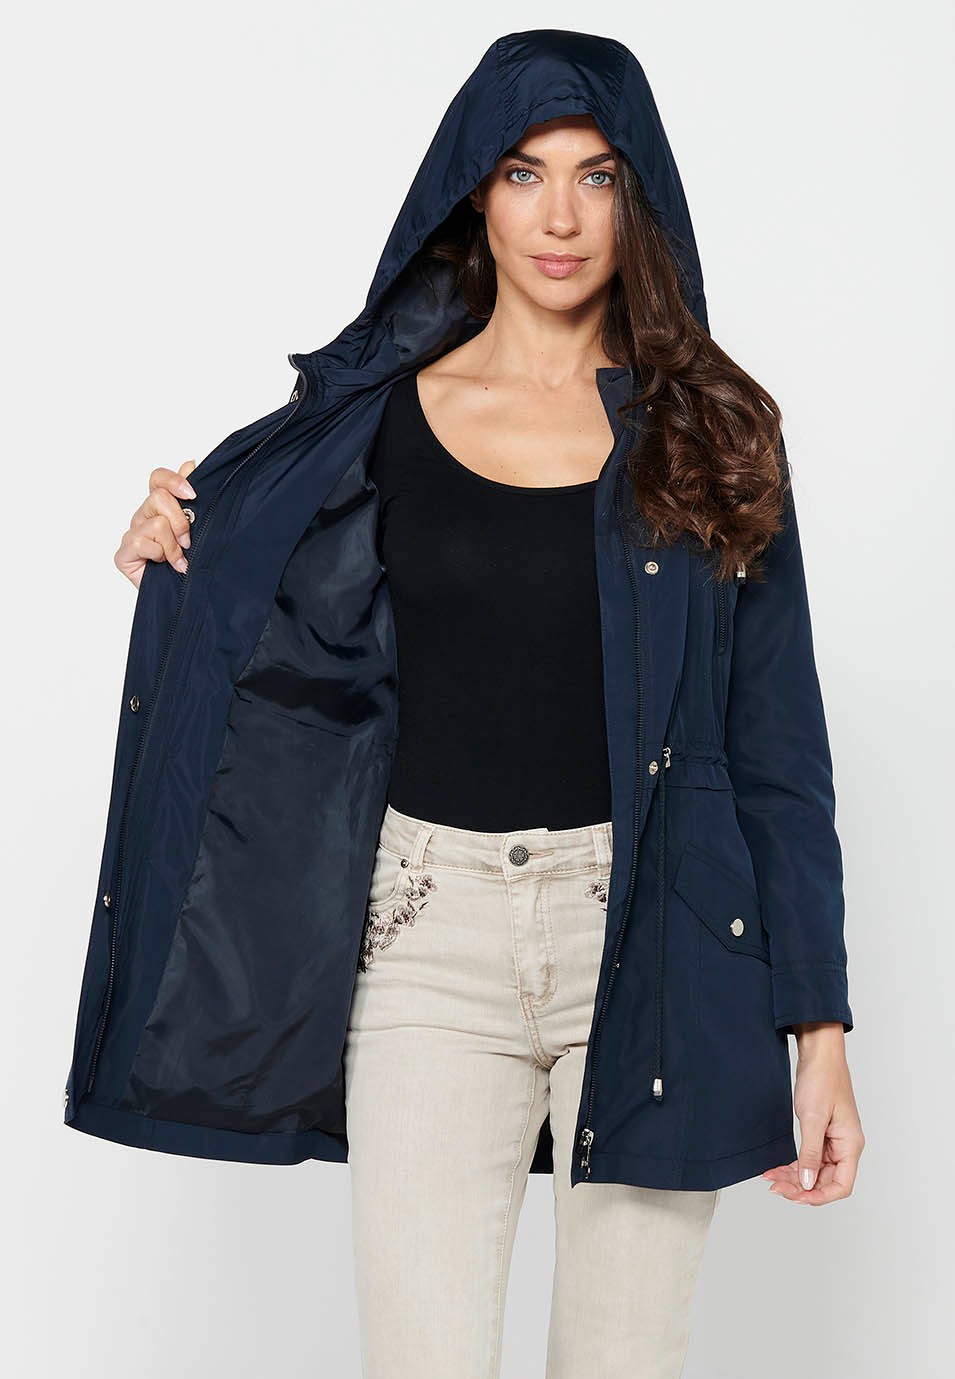 Navy Long Sleeve Parka Jacket with Zipper Front Closure and Hooded Collar with Pockets for Women